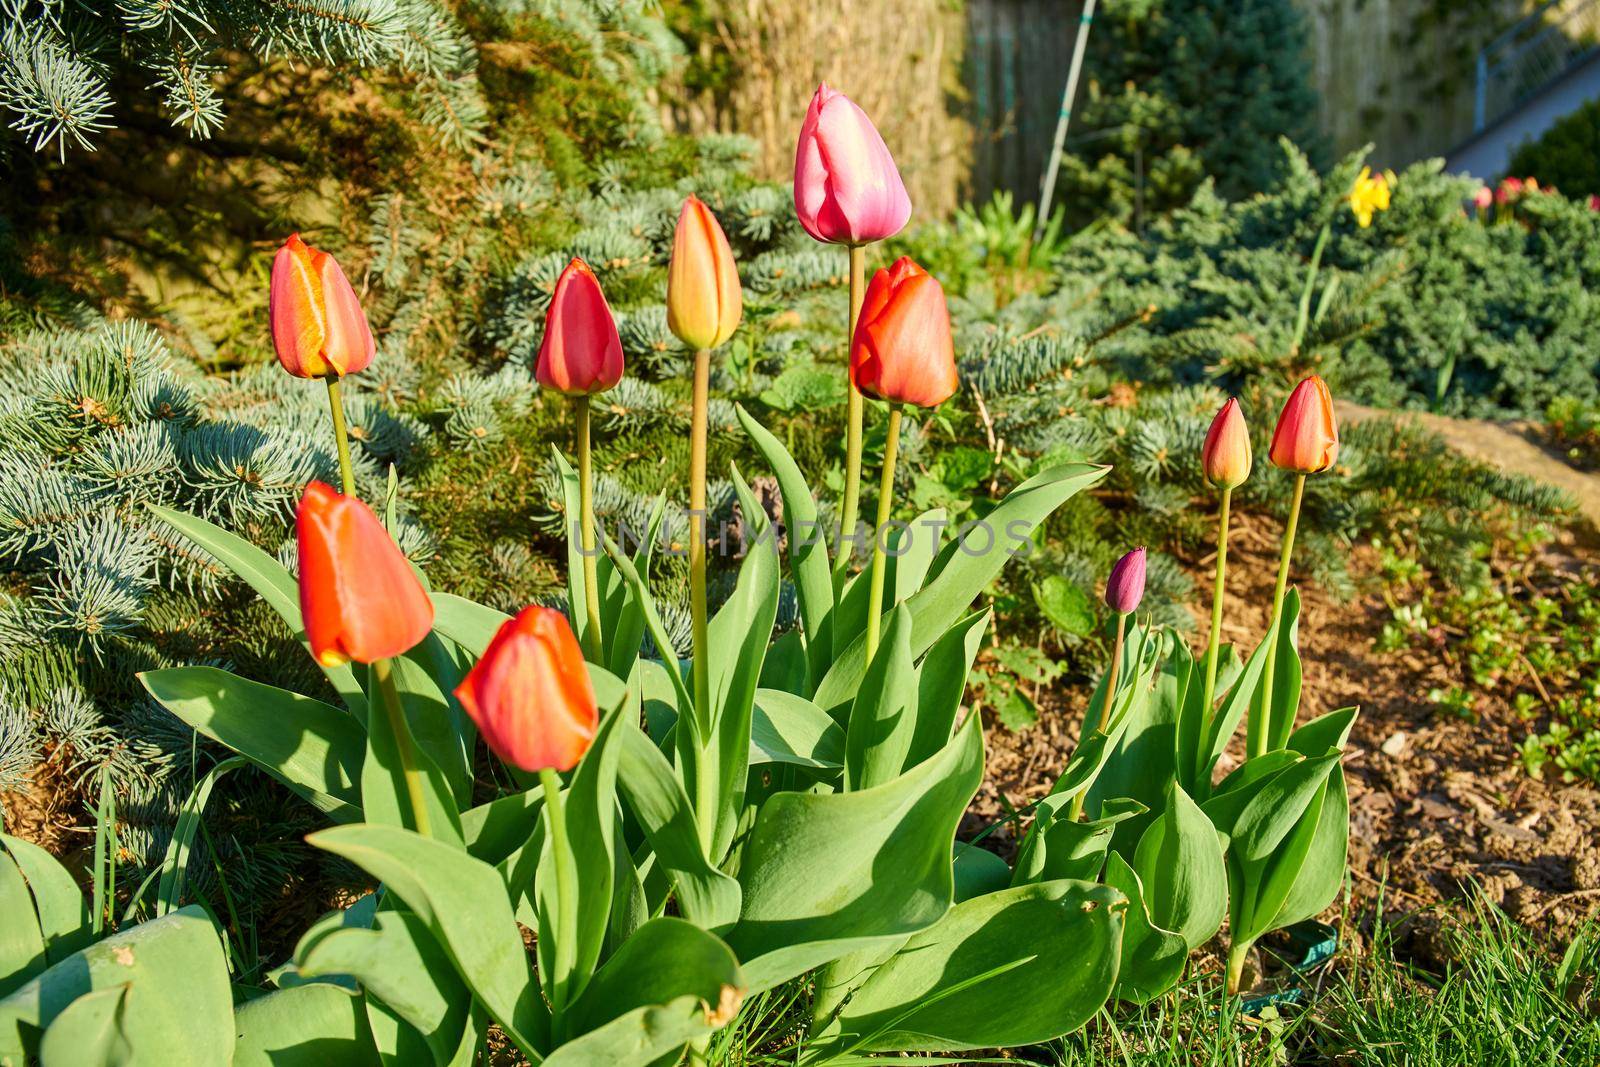 Tulips in blossom during spring time